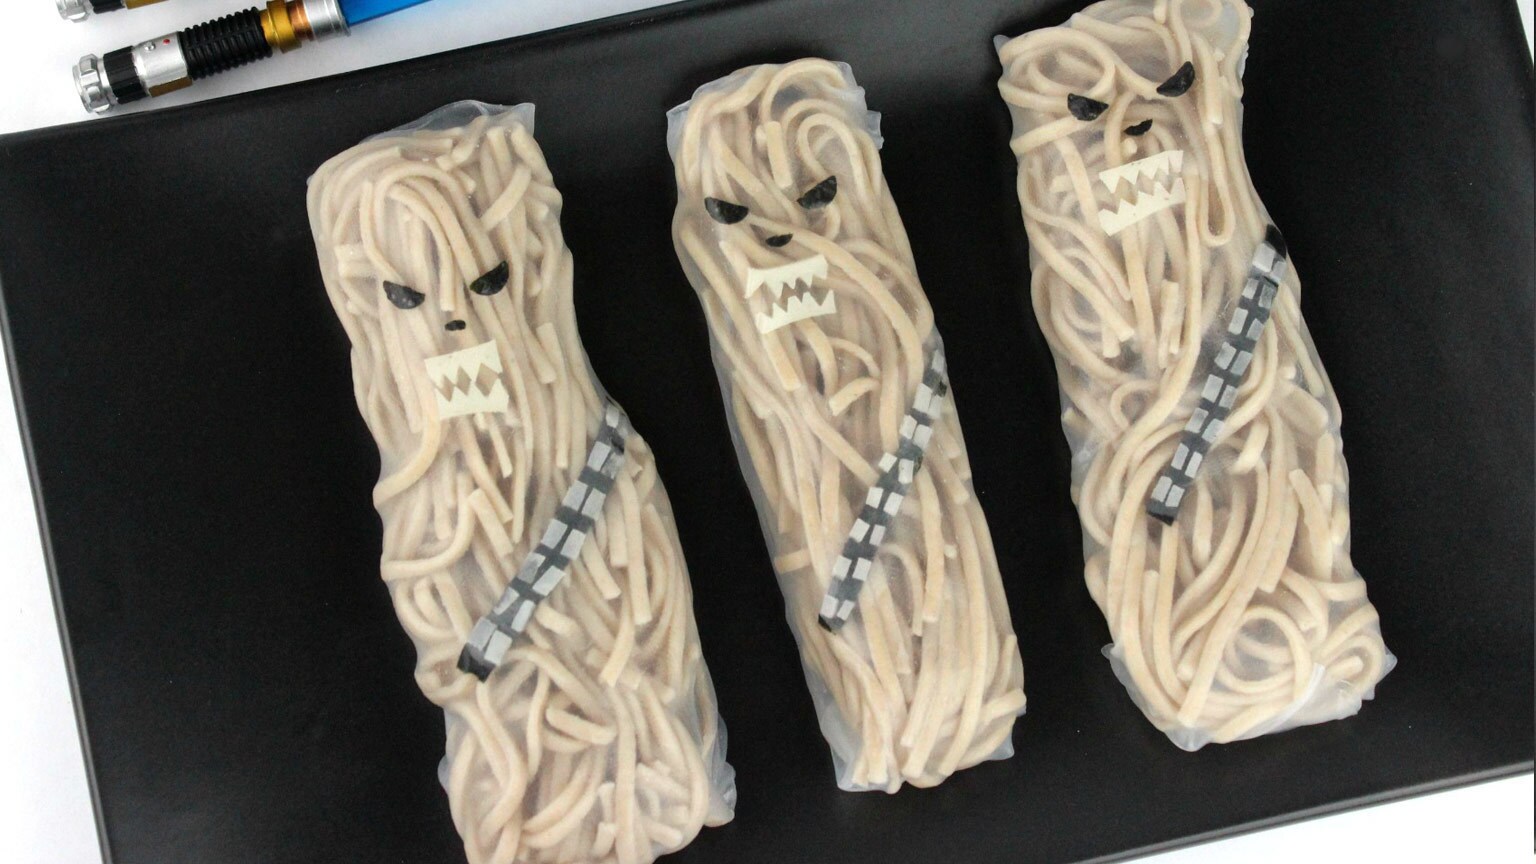 Let Out a Wookiee Roar for These Chewbacca Noodle Rolls